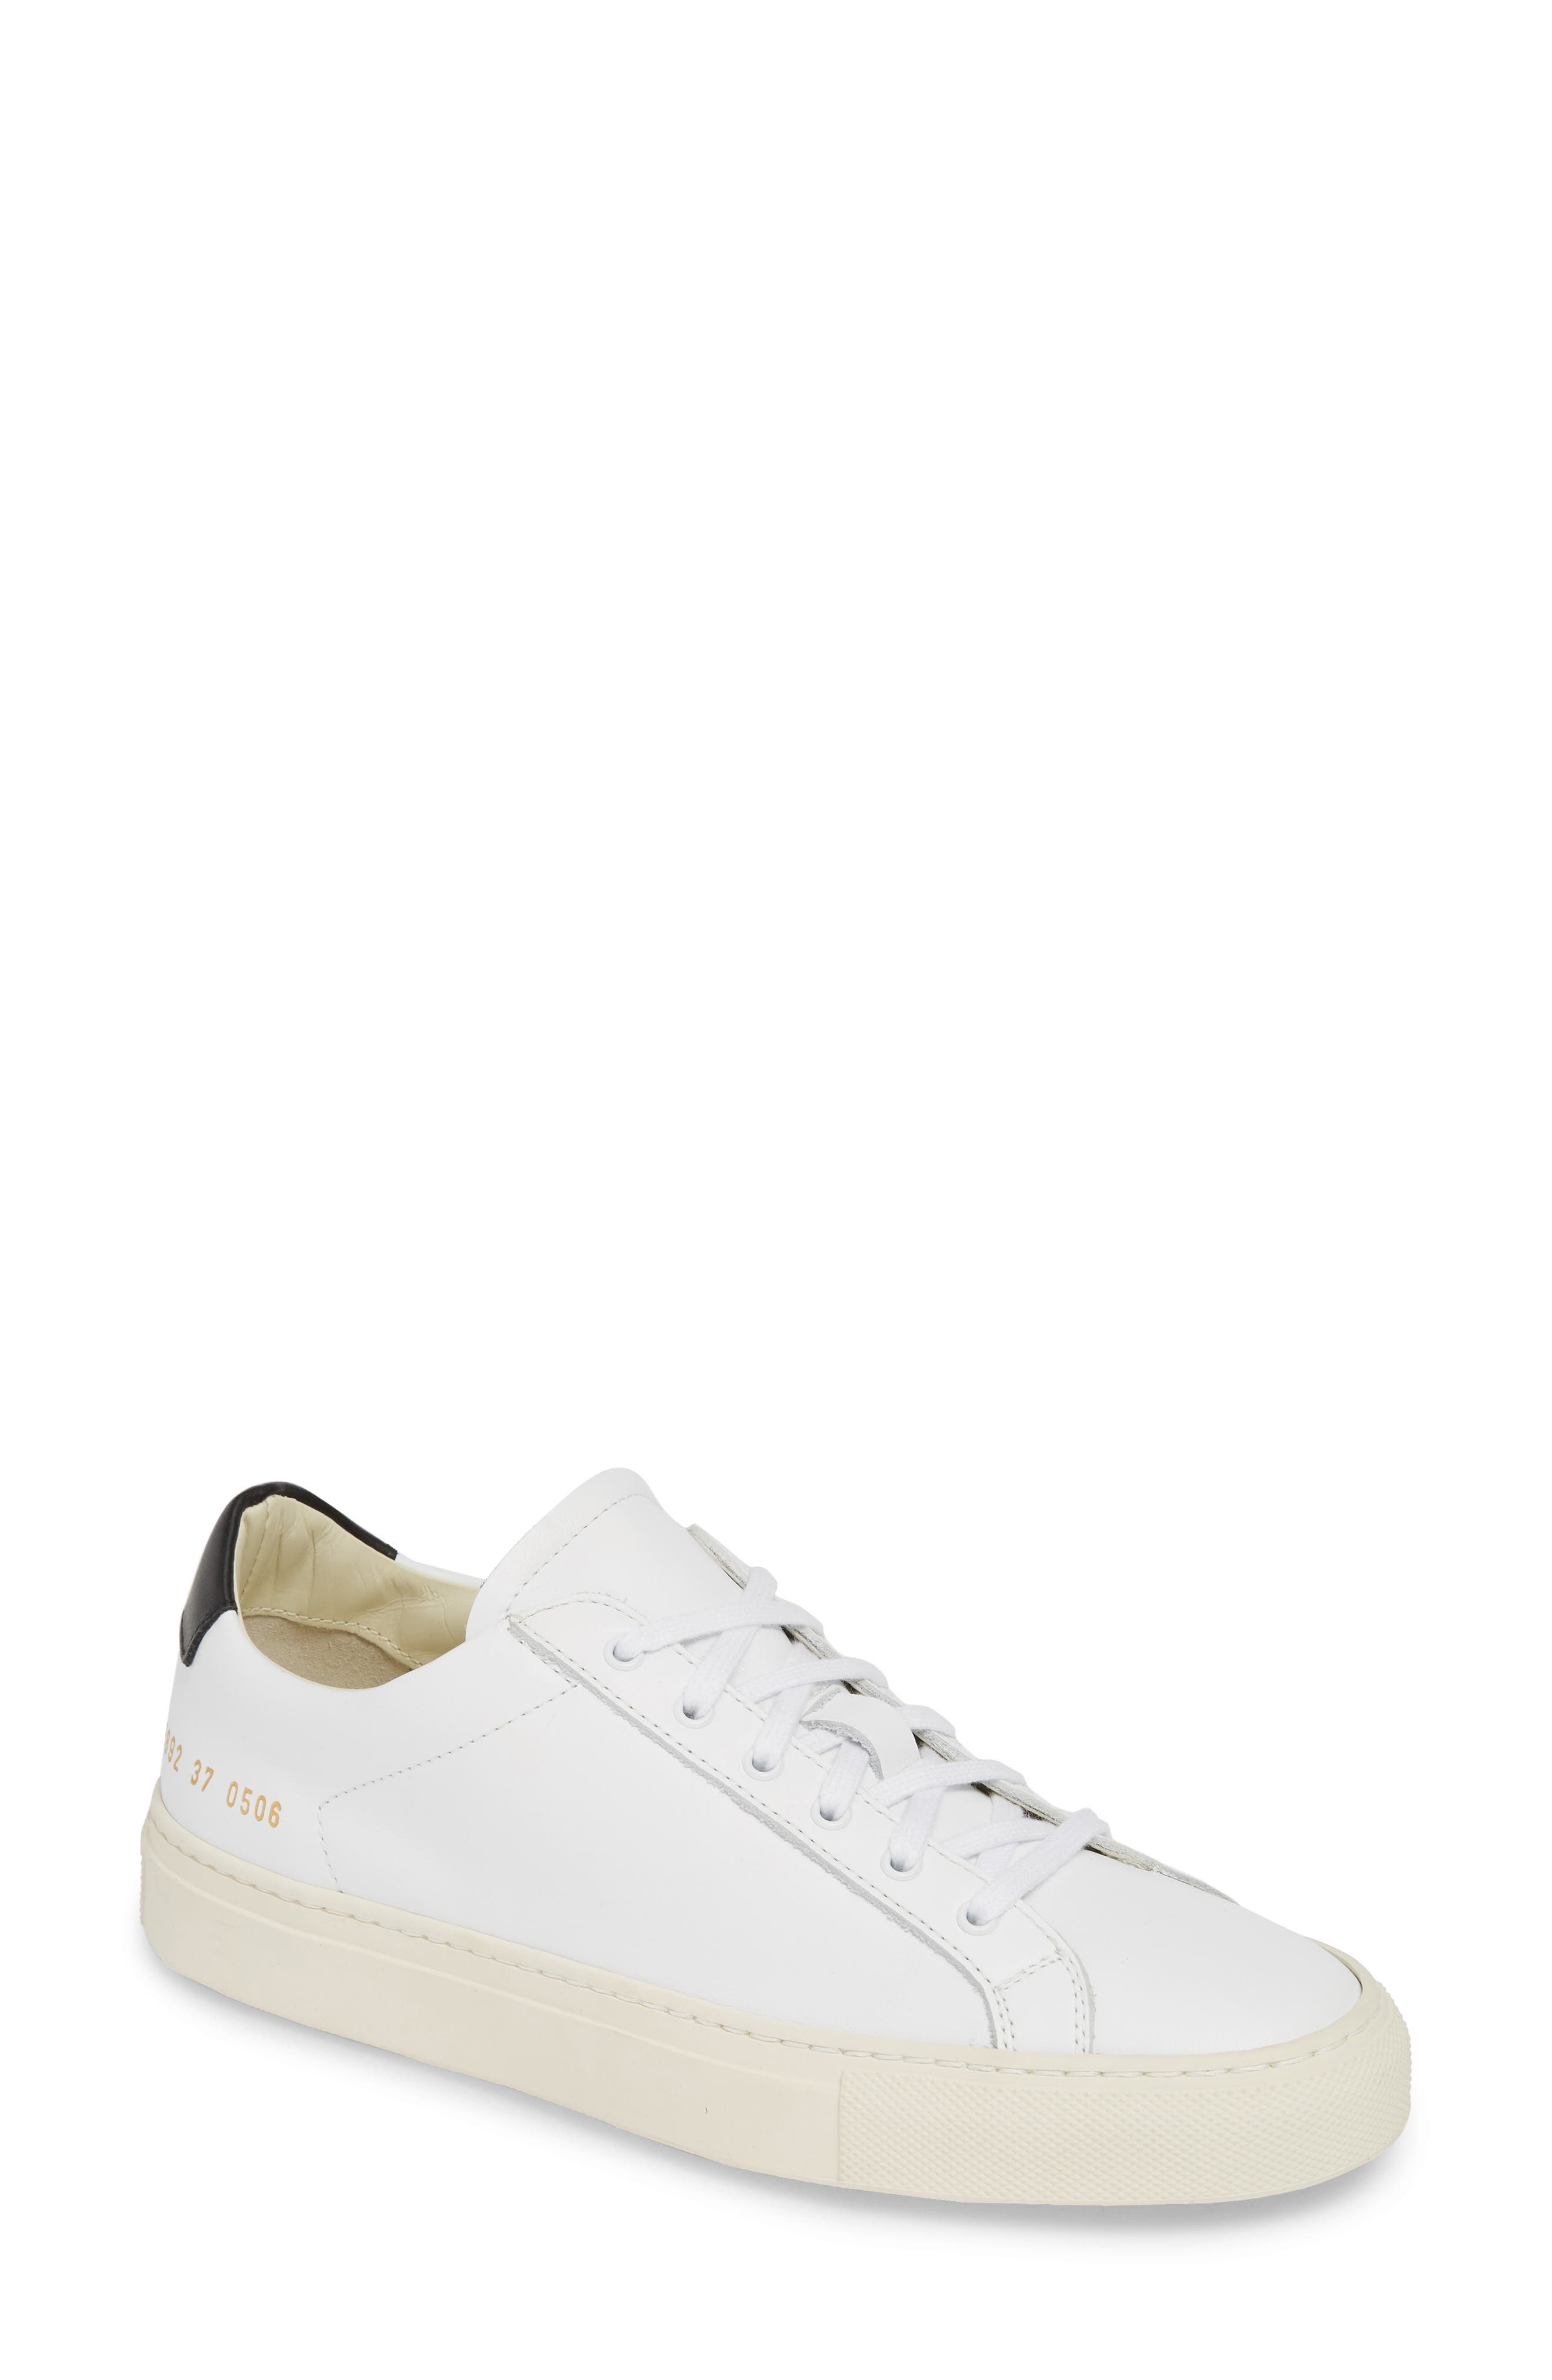 Common Projects Retro Low Top Sneaker 